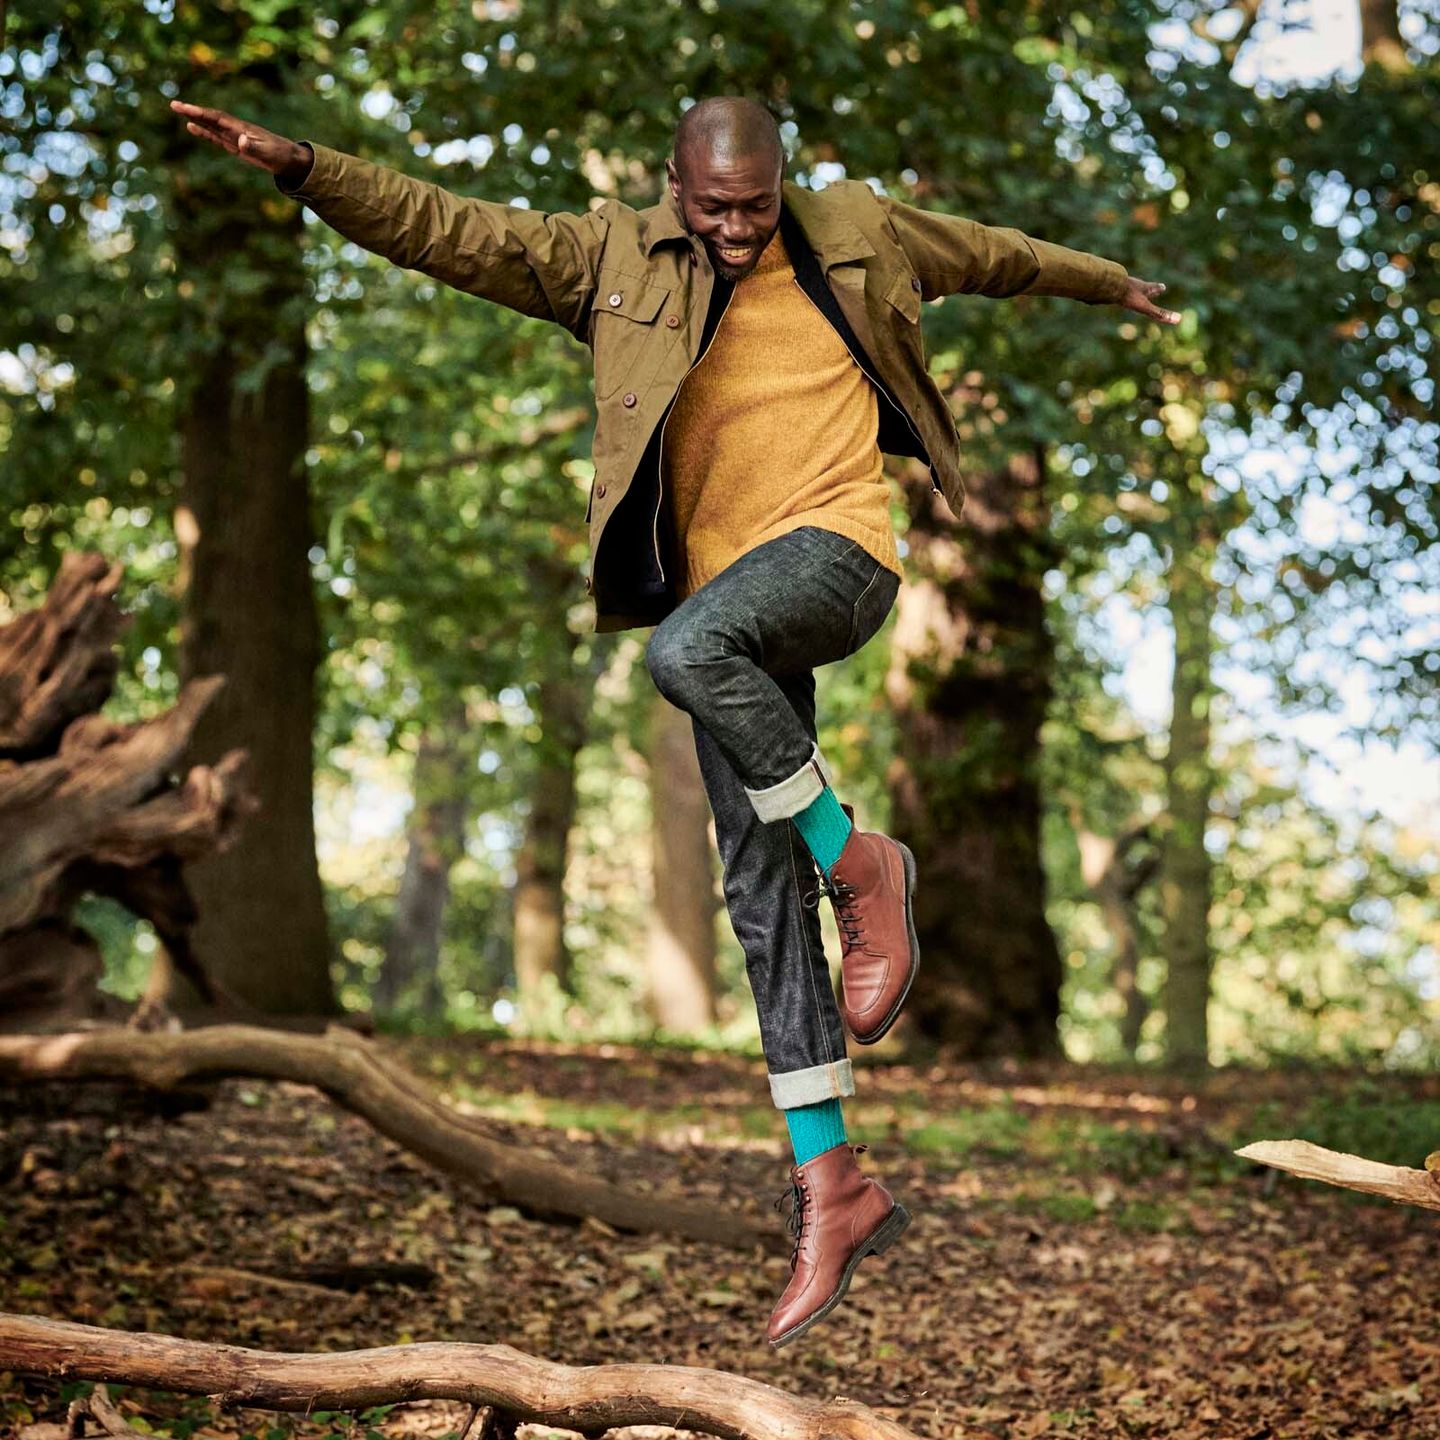 Ben Harris leaping in forest and wearing turquoise boot socks